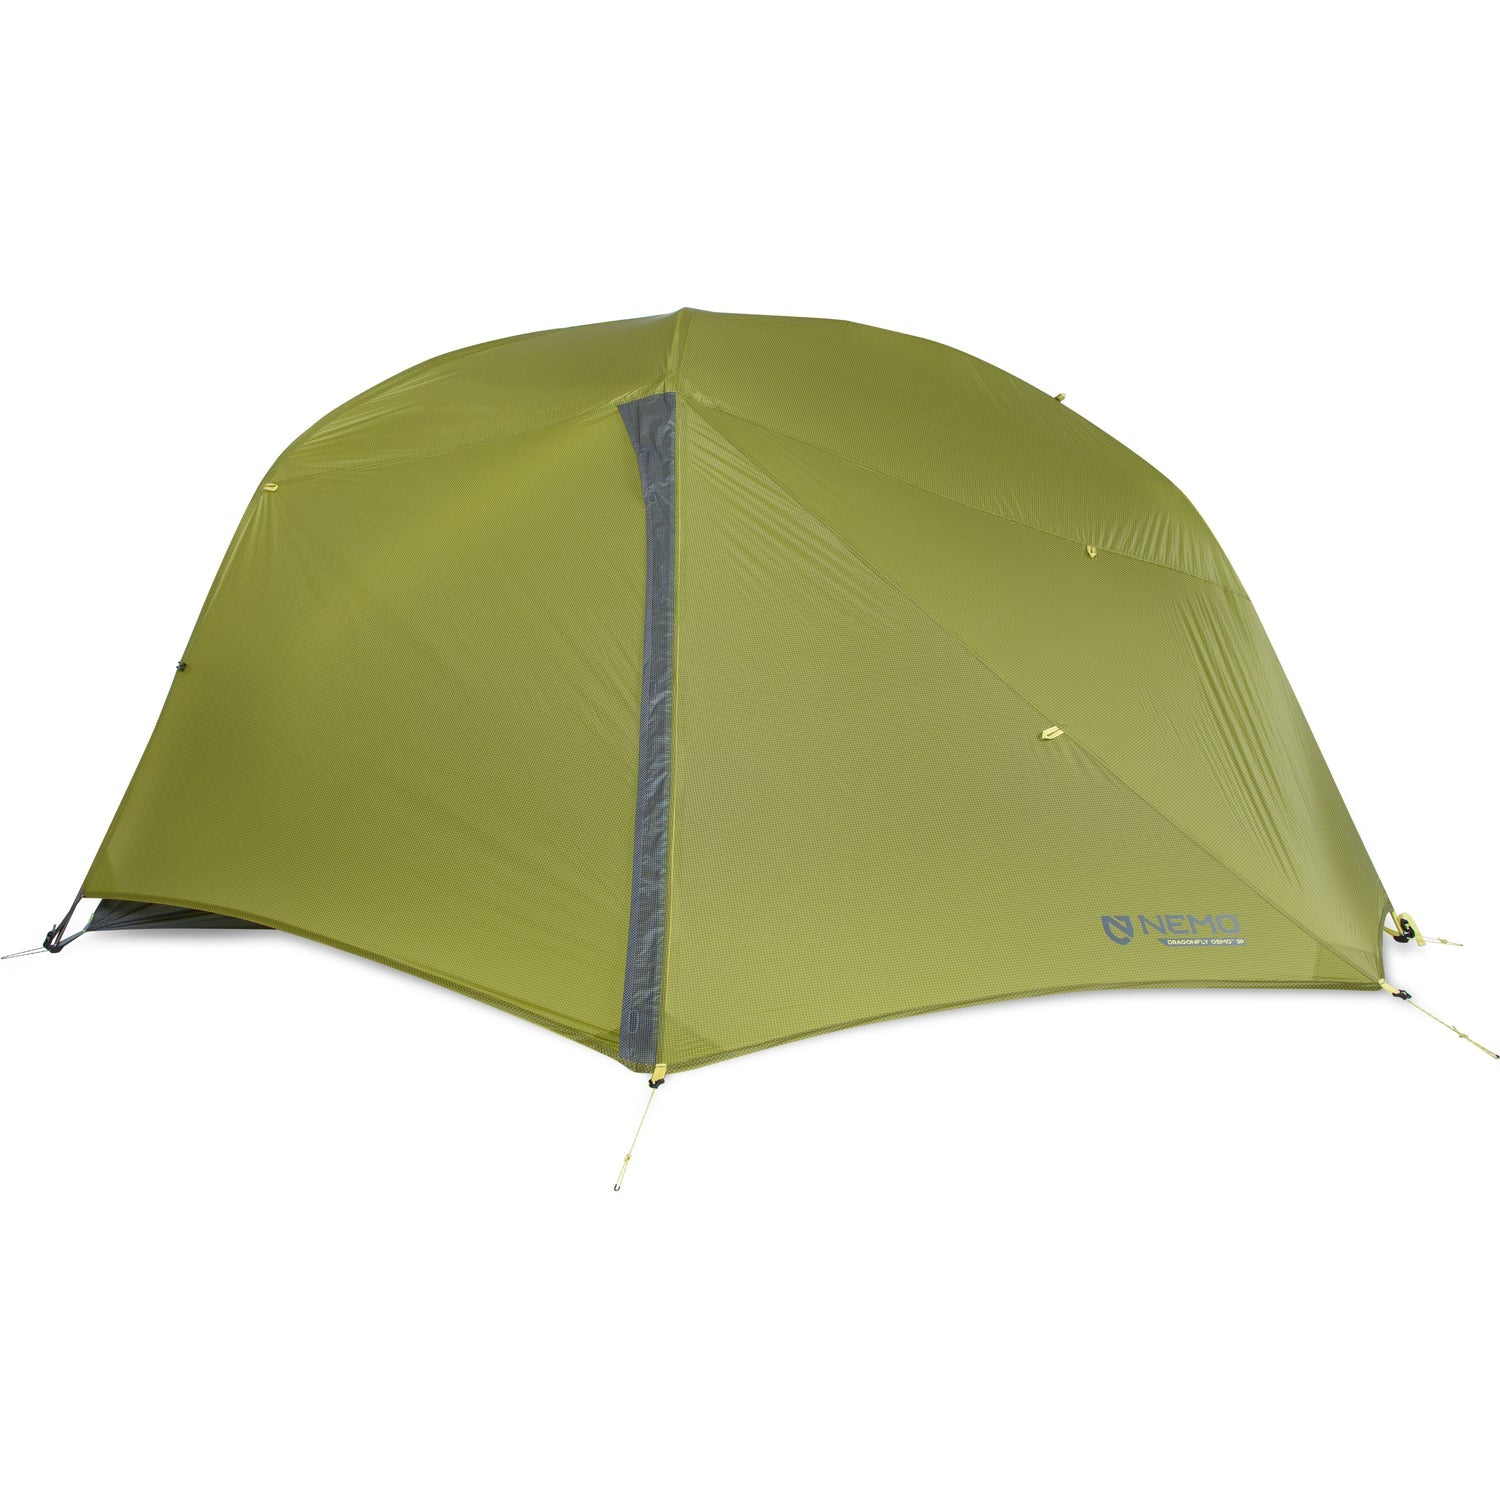 Nemo Dragonfly OSMO 3 Person Backpacking Tent